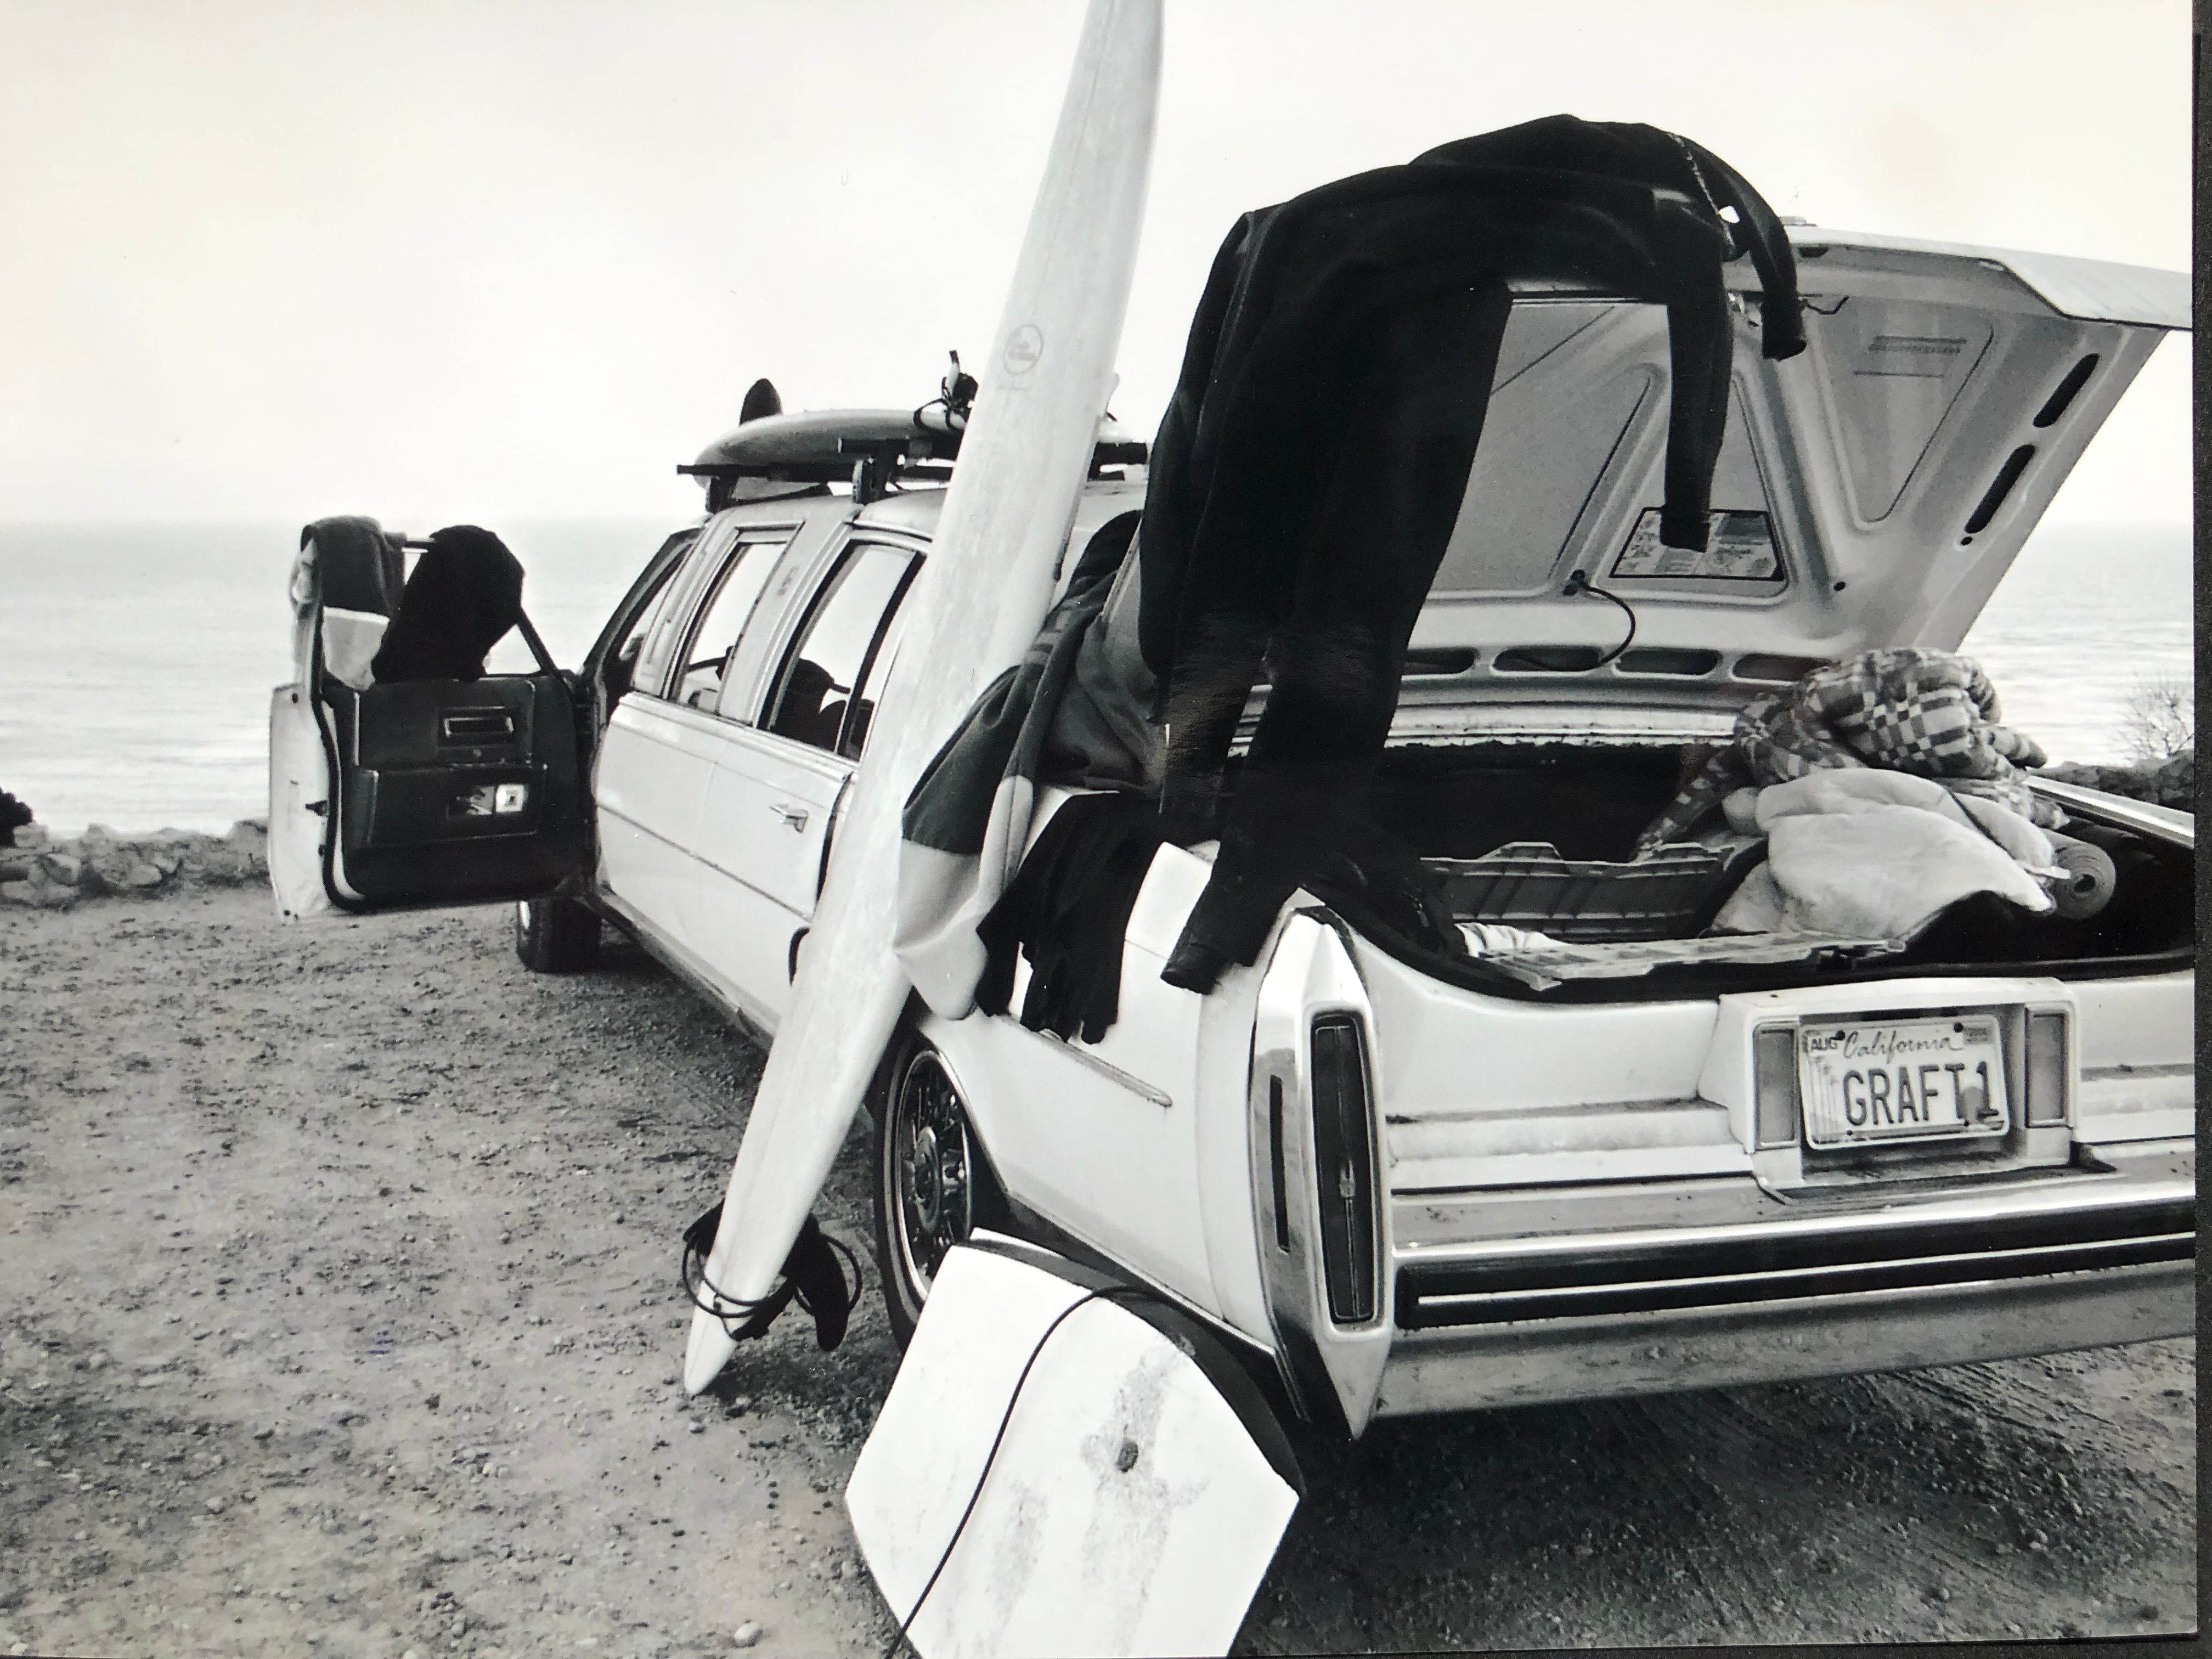 GRAFT car with surf equipment at a Californian beach in the late 1990s: mobility is closely linked to freedom.